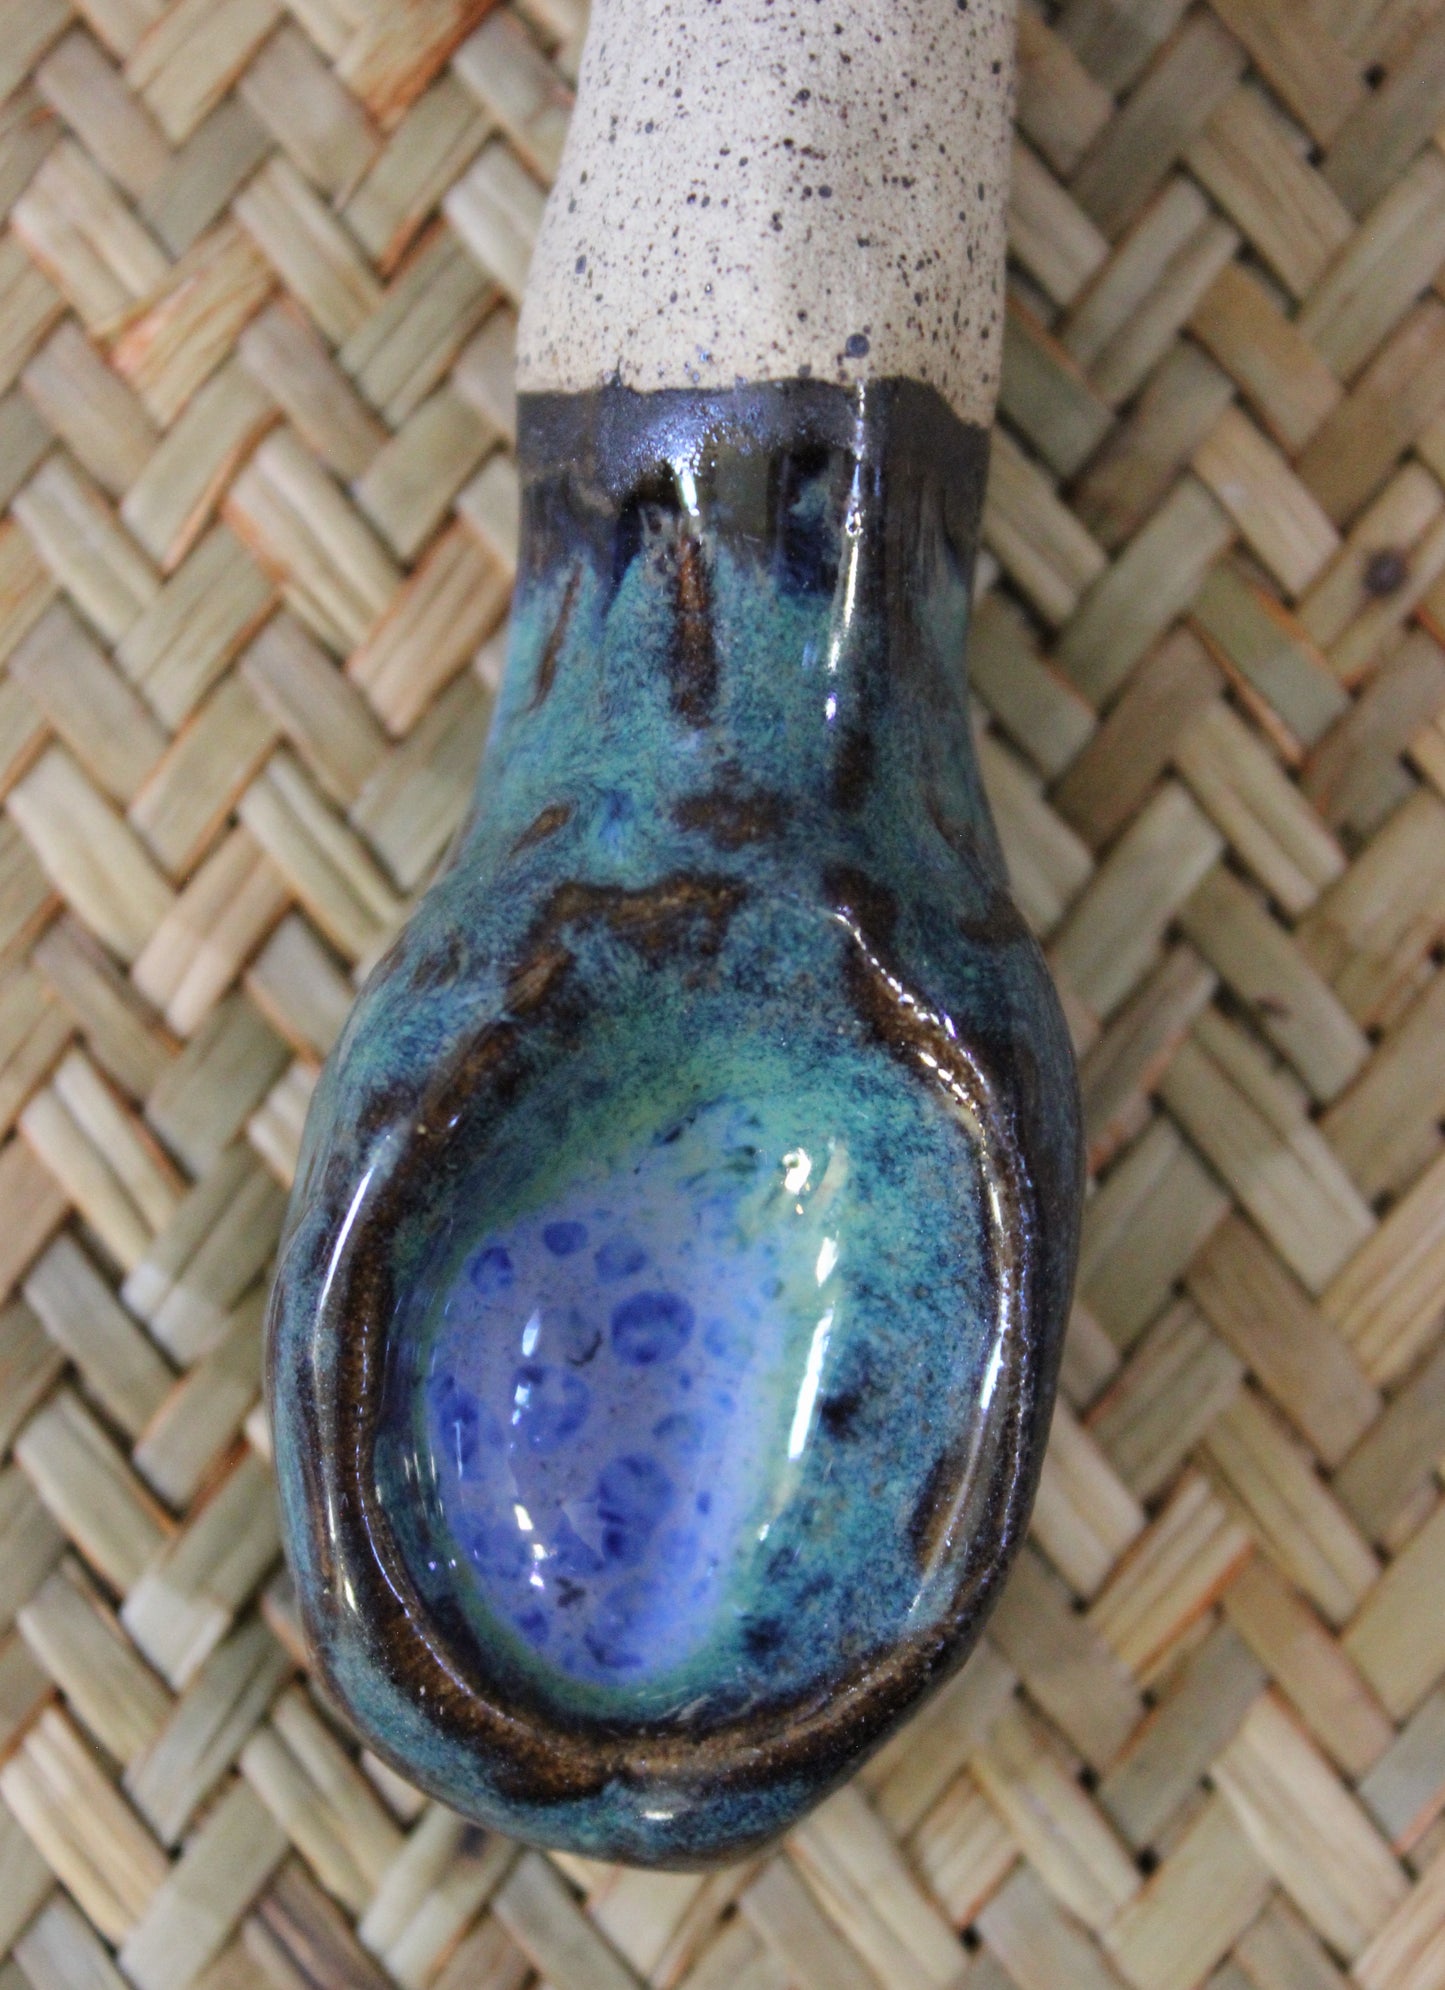 Organic Ceramic Turquoise-Blue Serving Spoon as a Unique Ornament or for Food Consumption